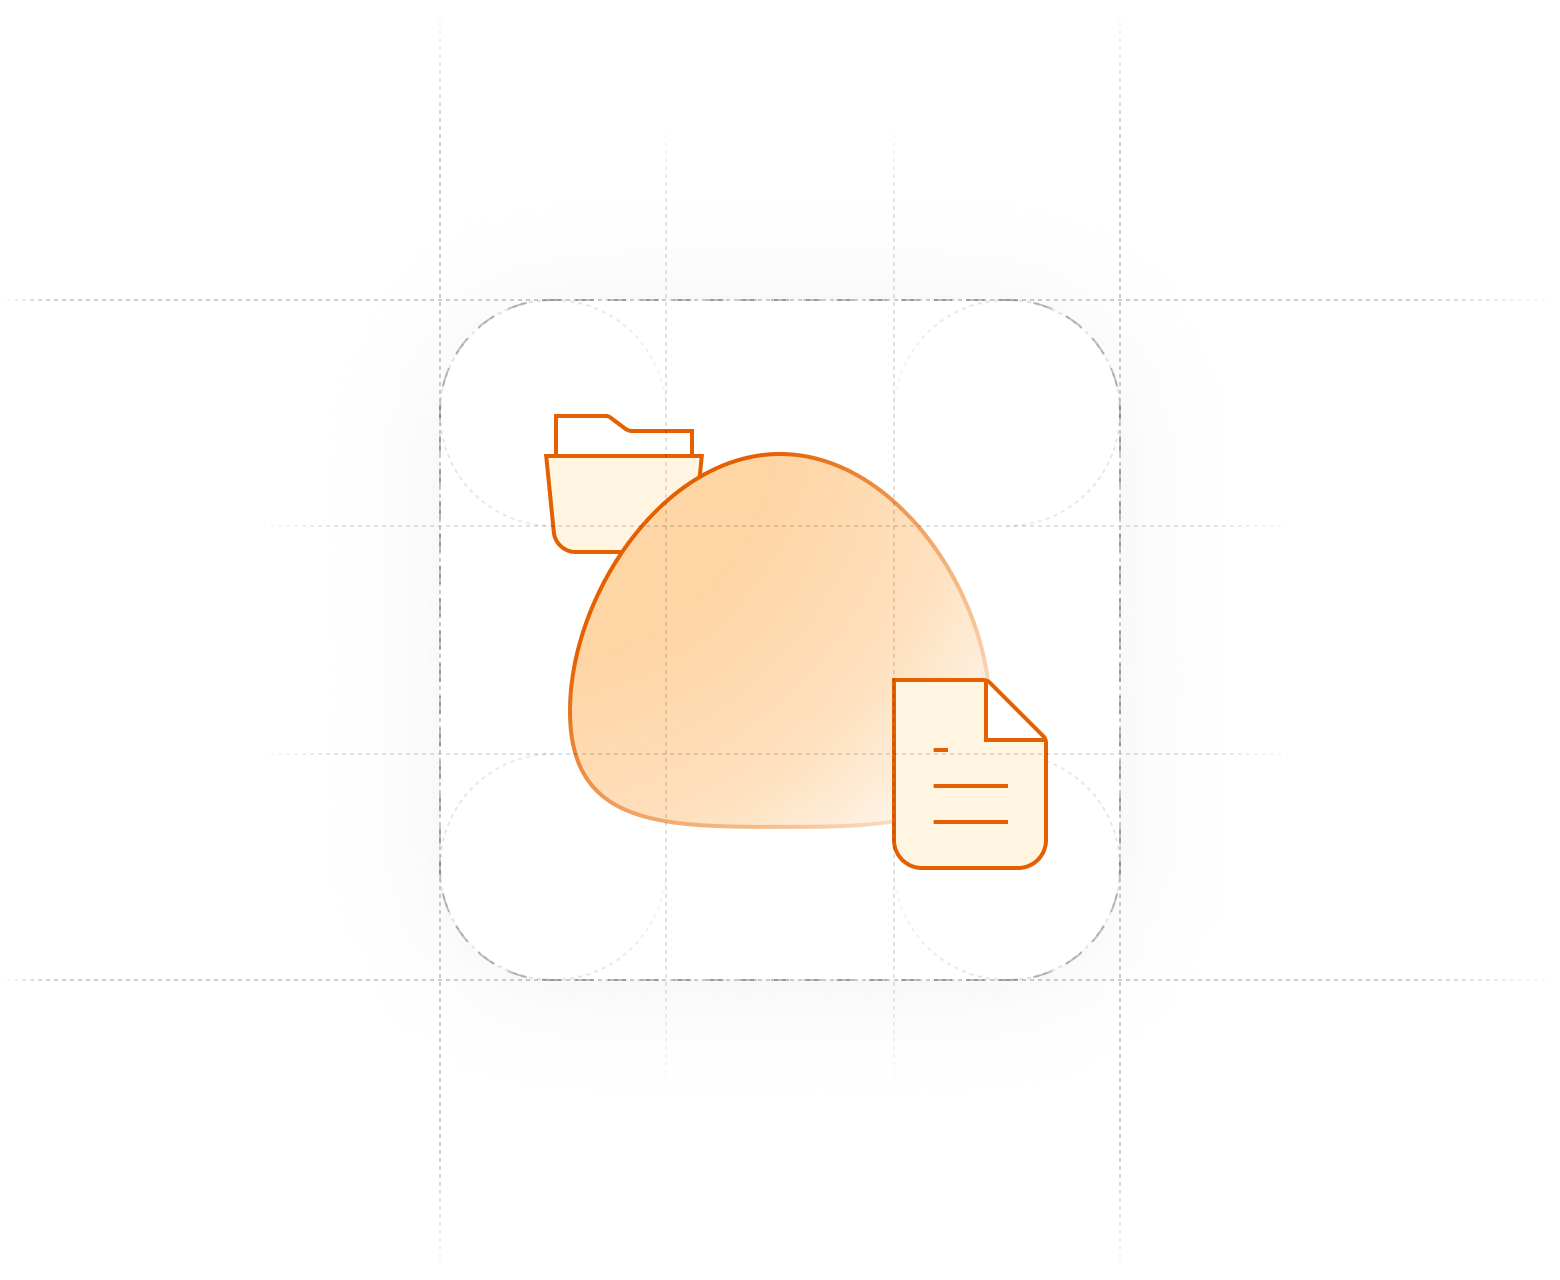 The dotted outline of a square with rounded corners encloses three illustrated items. At the center is a large orange blob, peeking from behind on its left is a folder approximately one third the size of the blob. In front, there is a piece of paper.